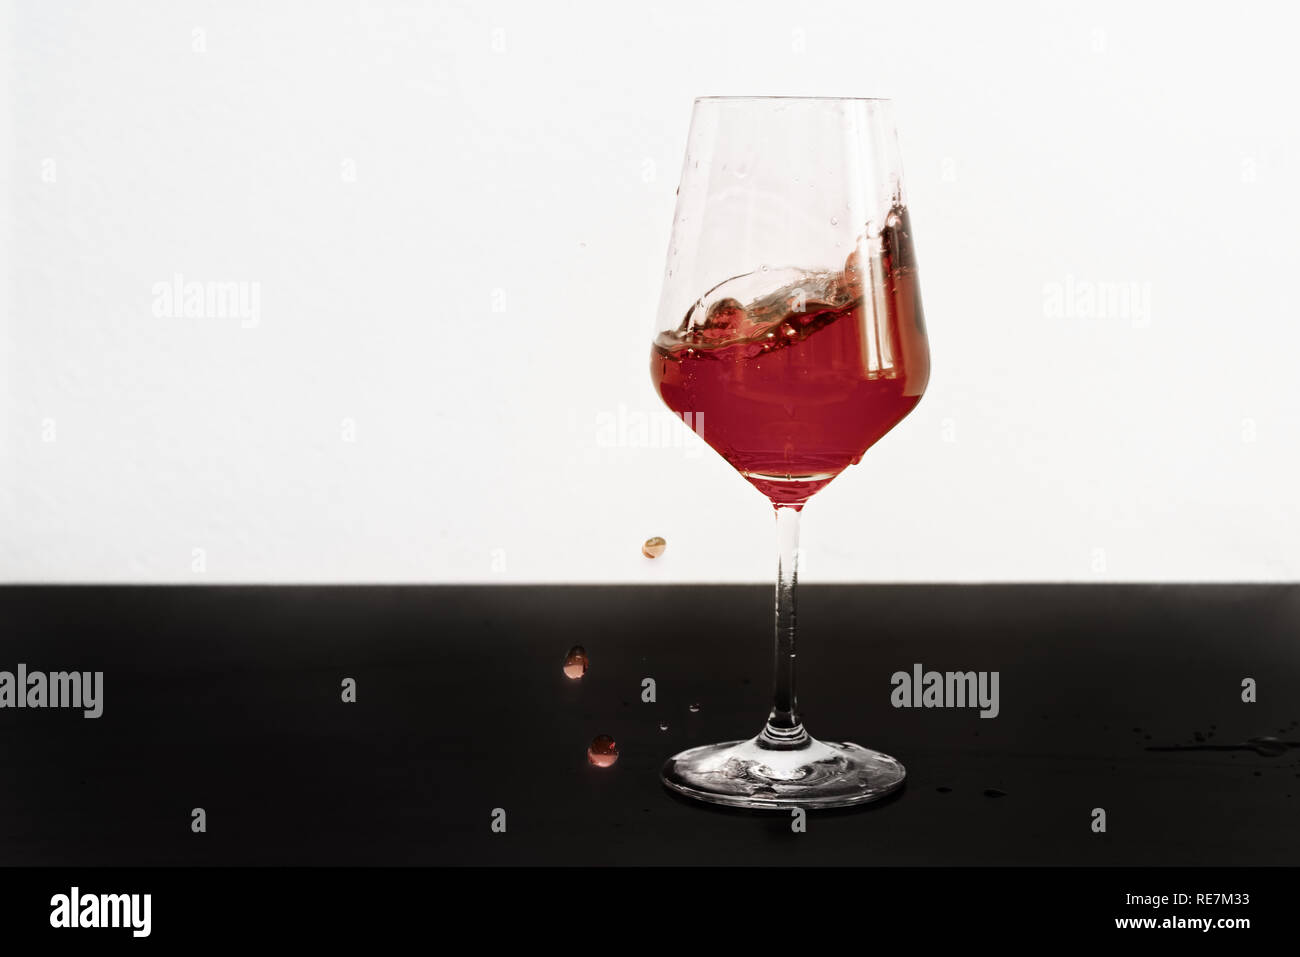 Wine glass on dark table and white background with red wine splashing out of a glass Stock Photo